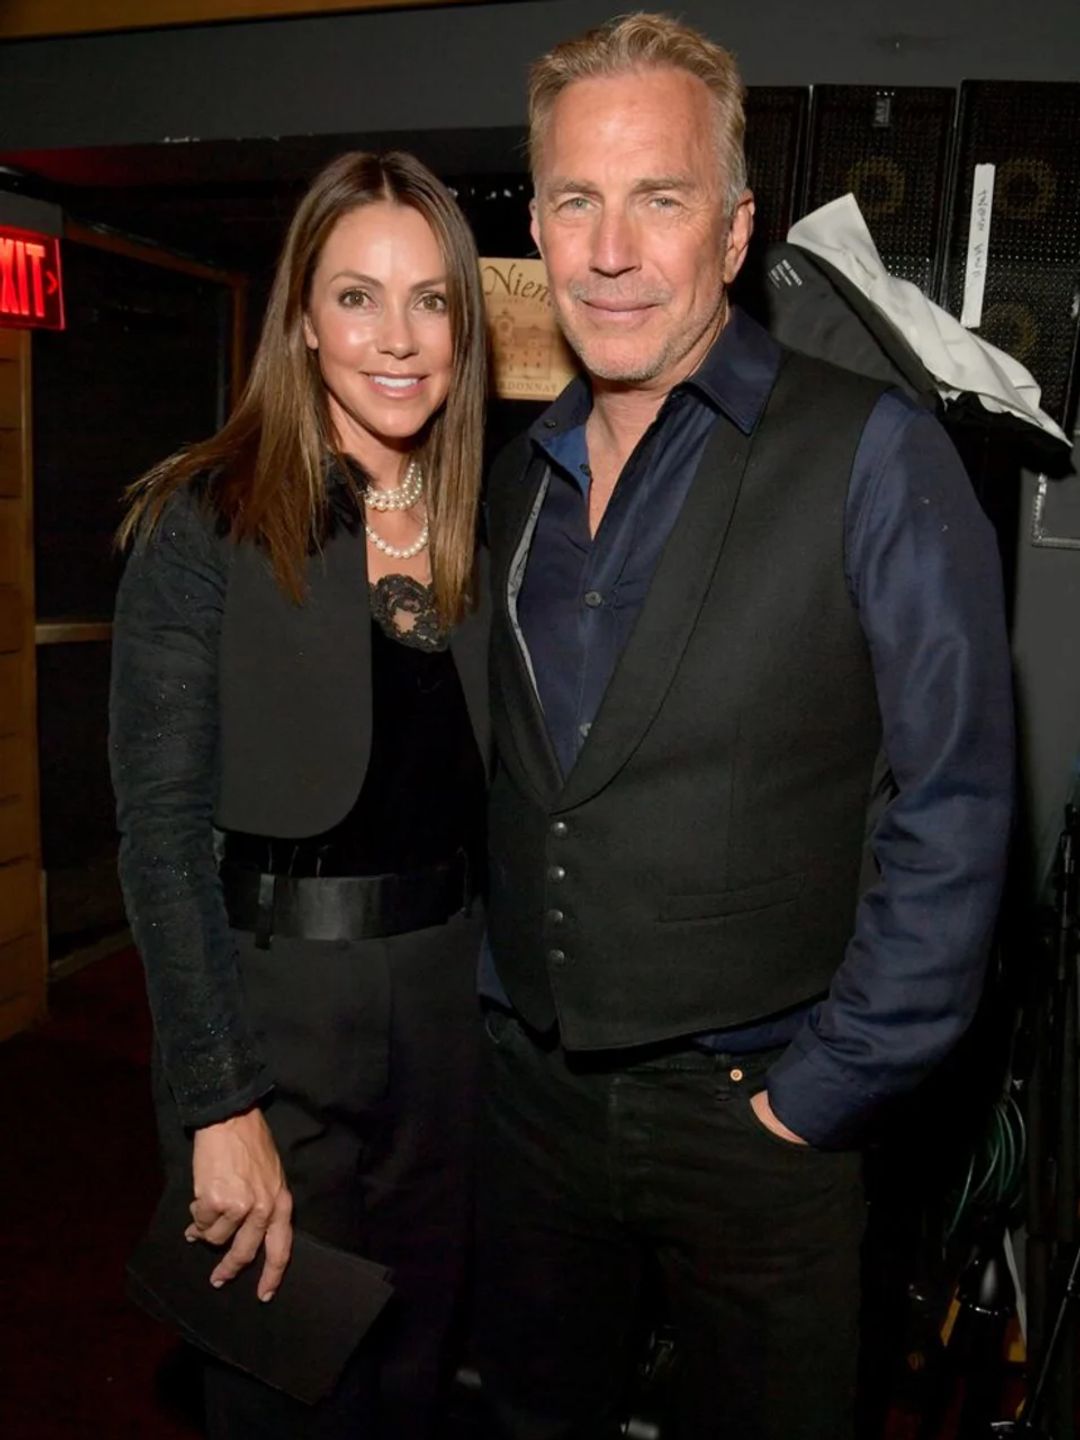 Kevin and Christine photographed as a couple at an event